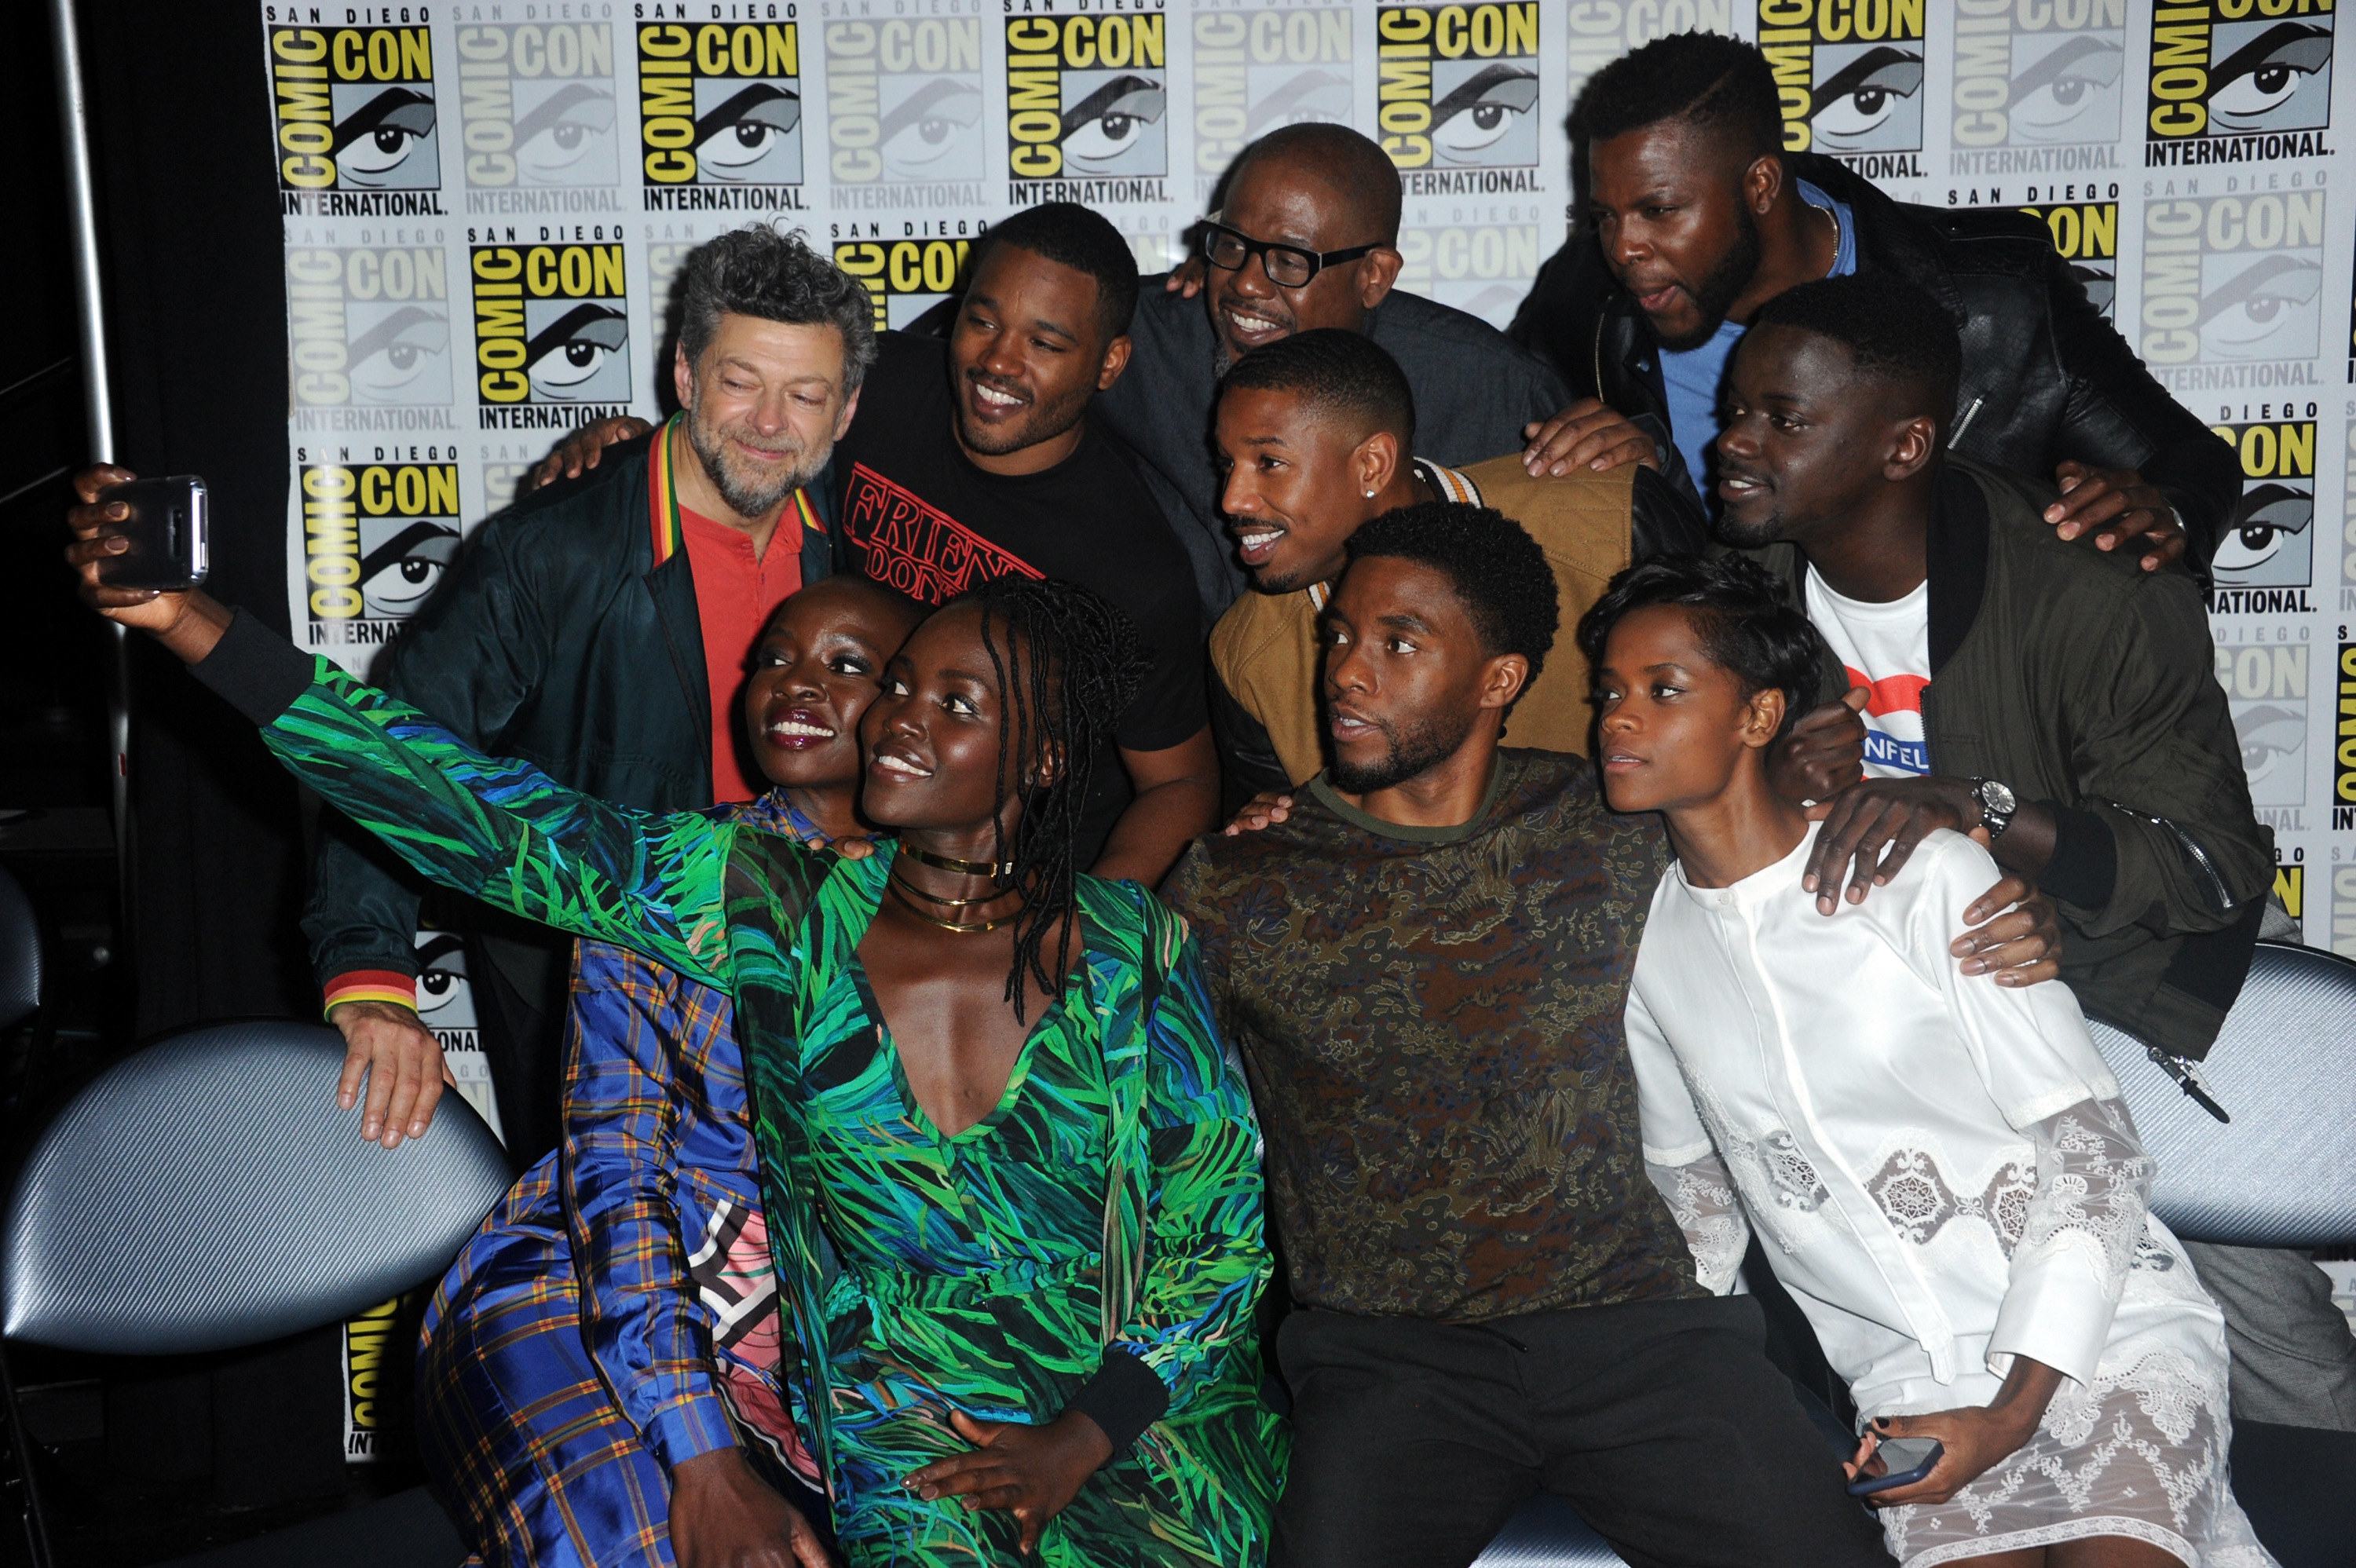 The cast huddles together for a selfie at an interview